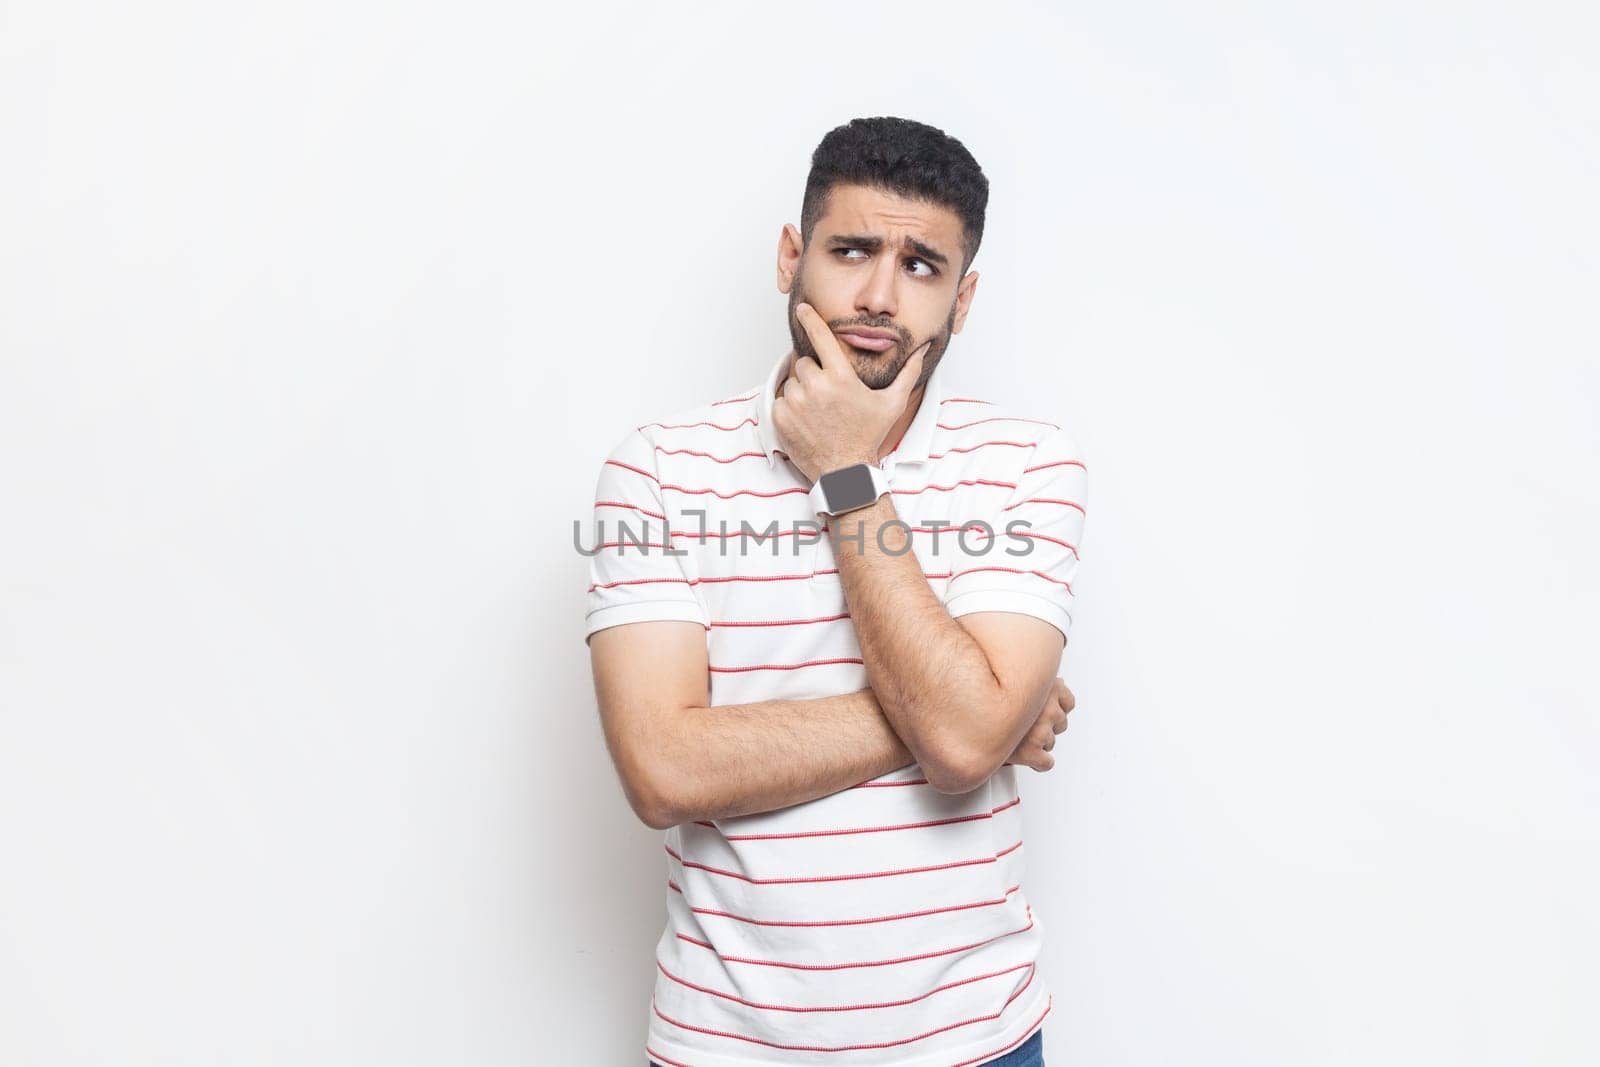 Portrait of pensive thoughtful attractive young adult bearded man wearing striped t-shirt standing holding chin, pondering, thinking. Indoor studio shot isolated on gray background.